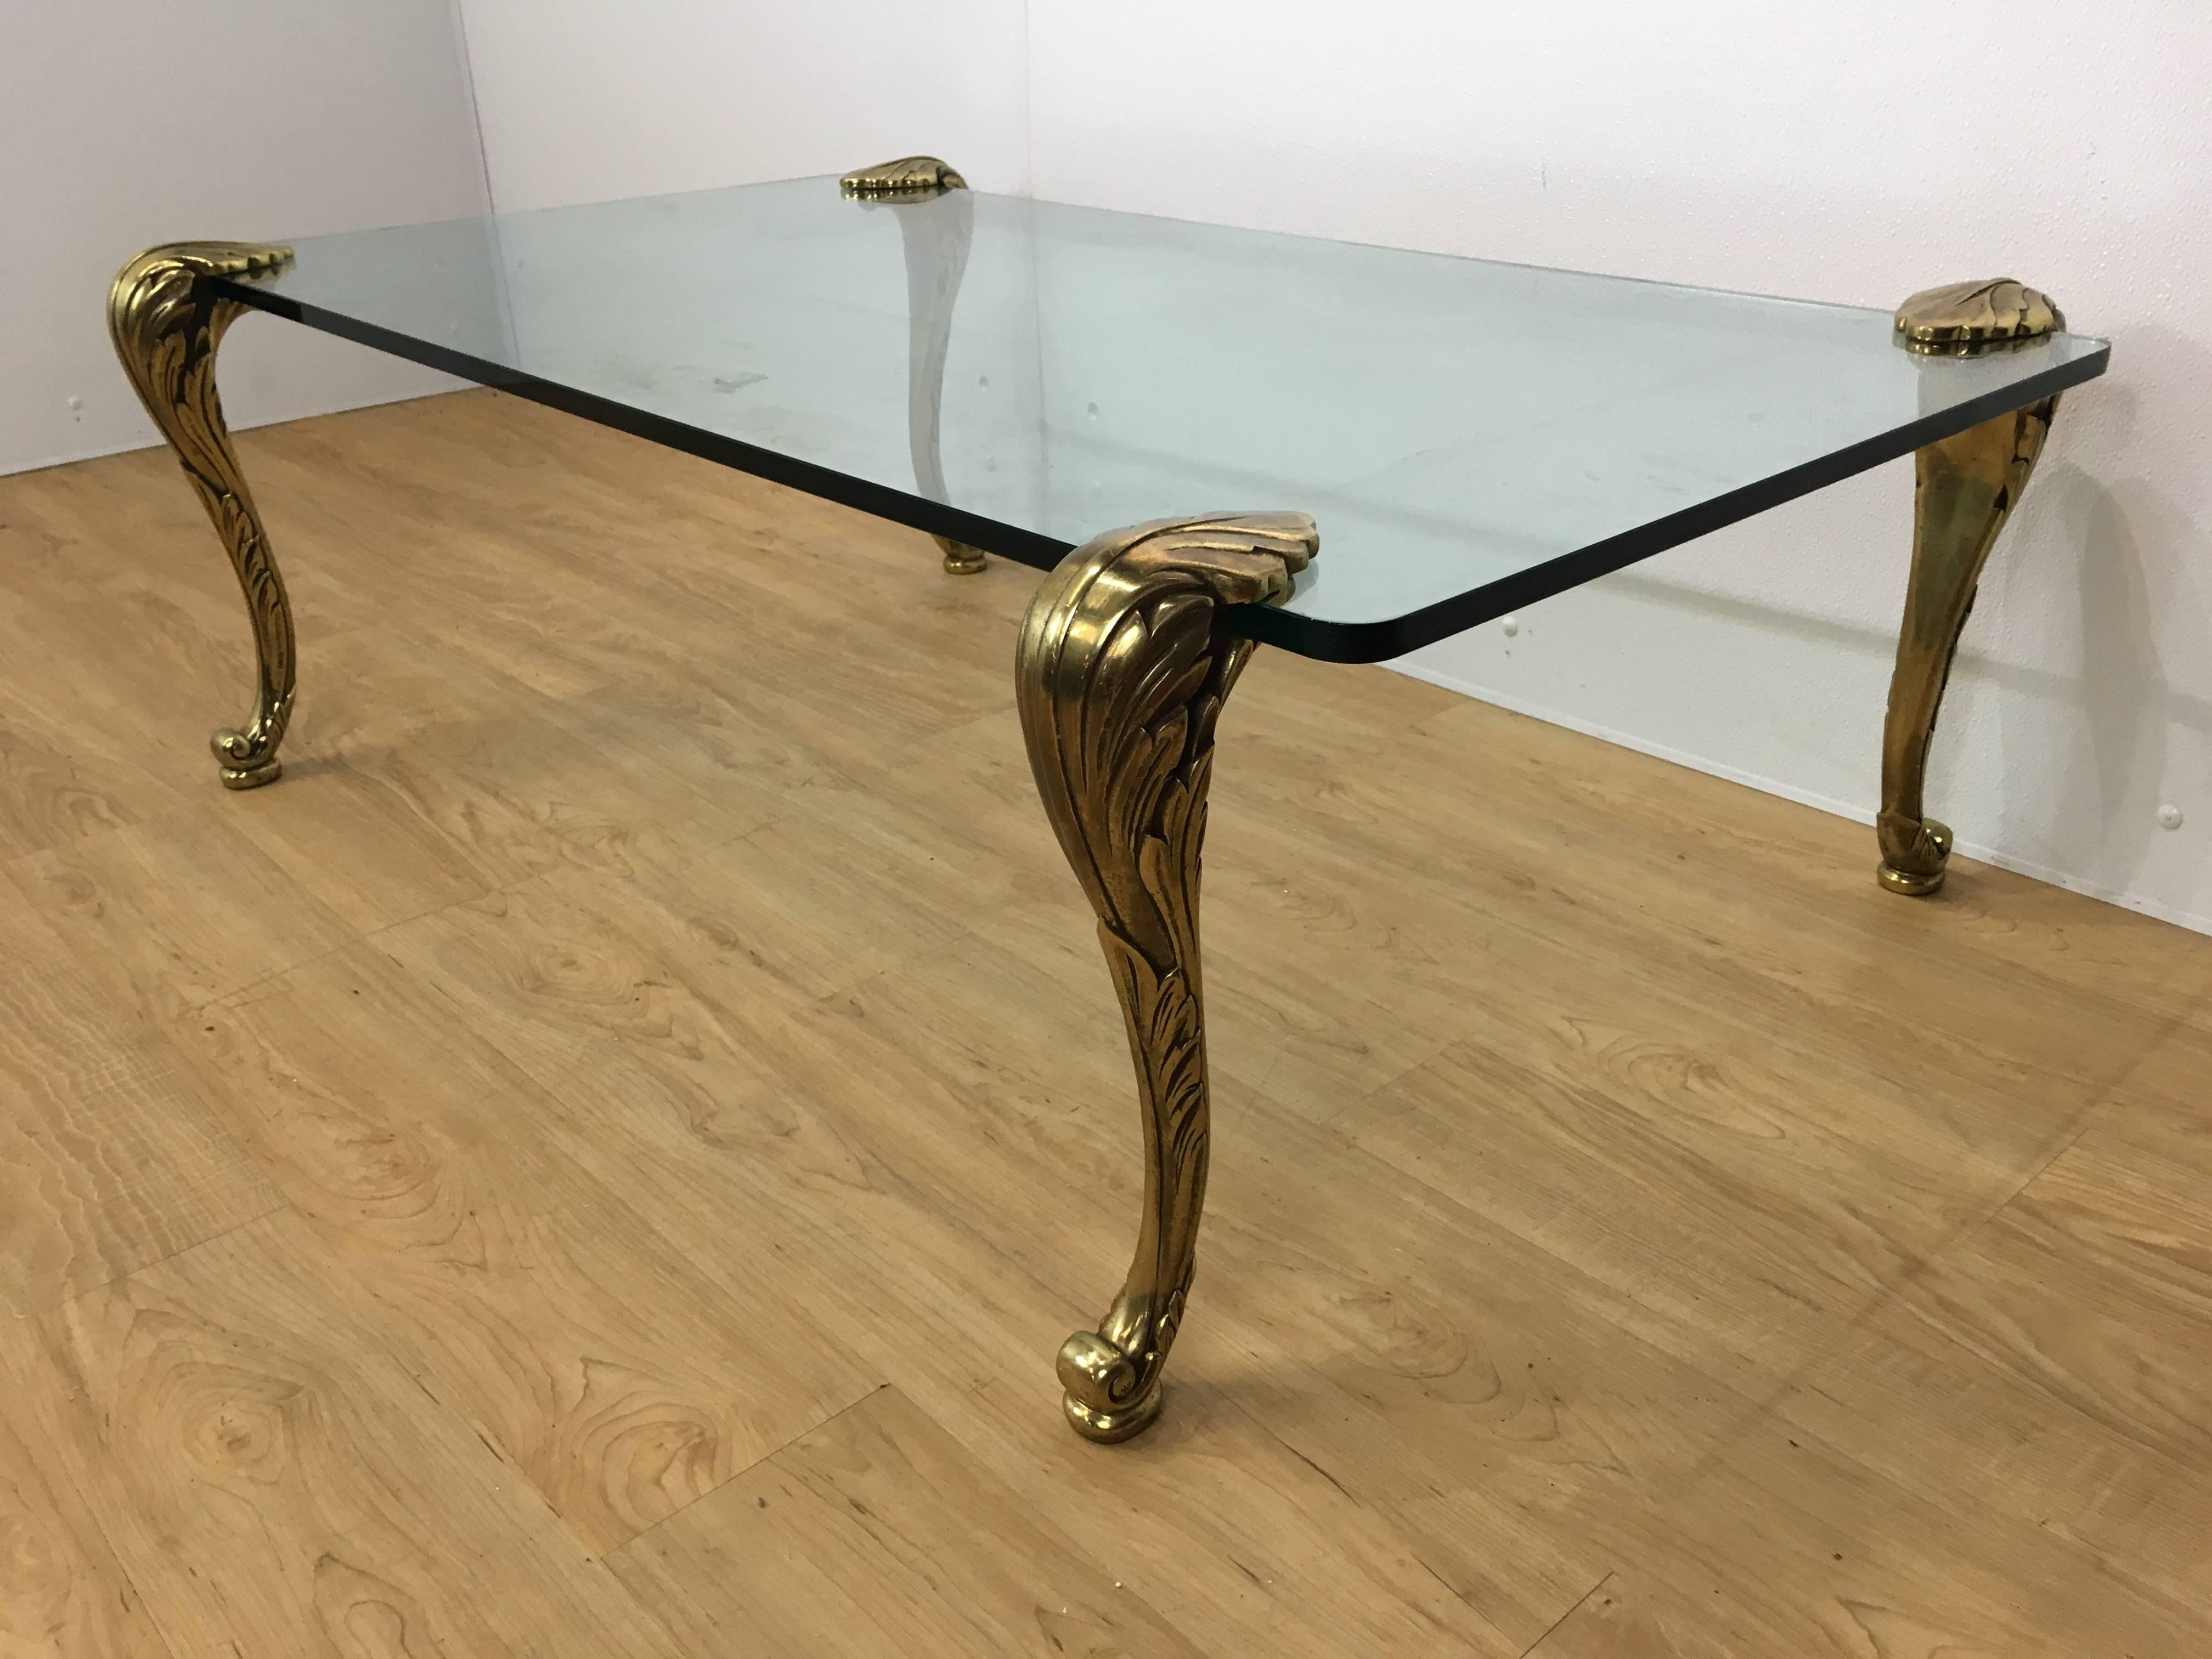 P. E. Guerin style gilt bronze coffee table, of substantial rectangular form with four finely heavy cast bronze laurel legs.